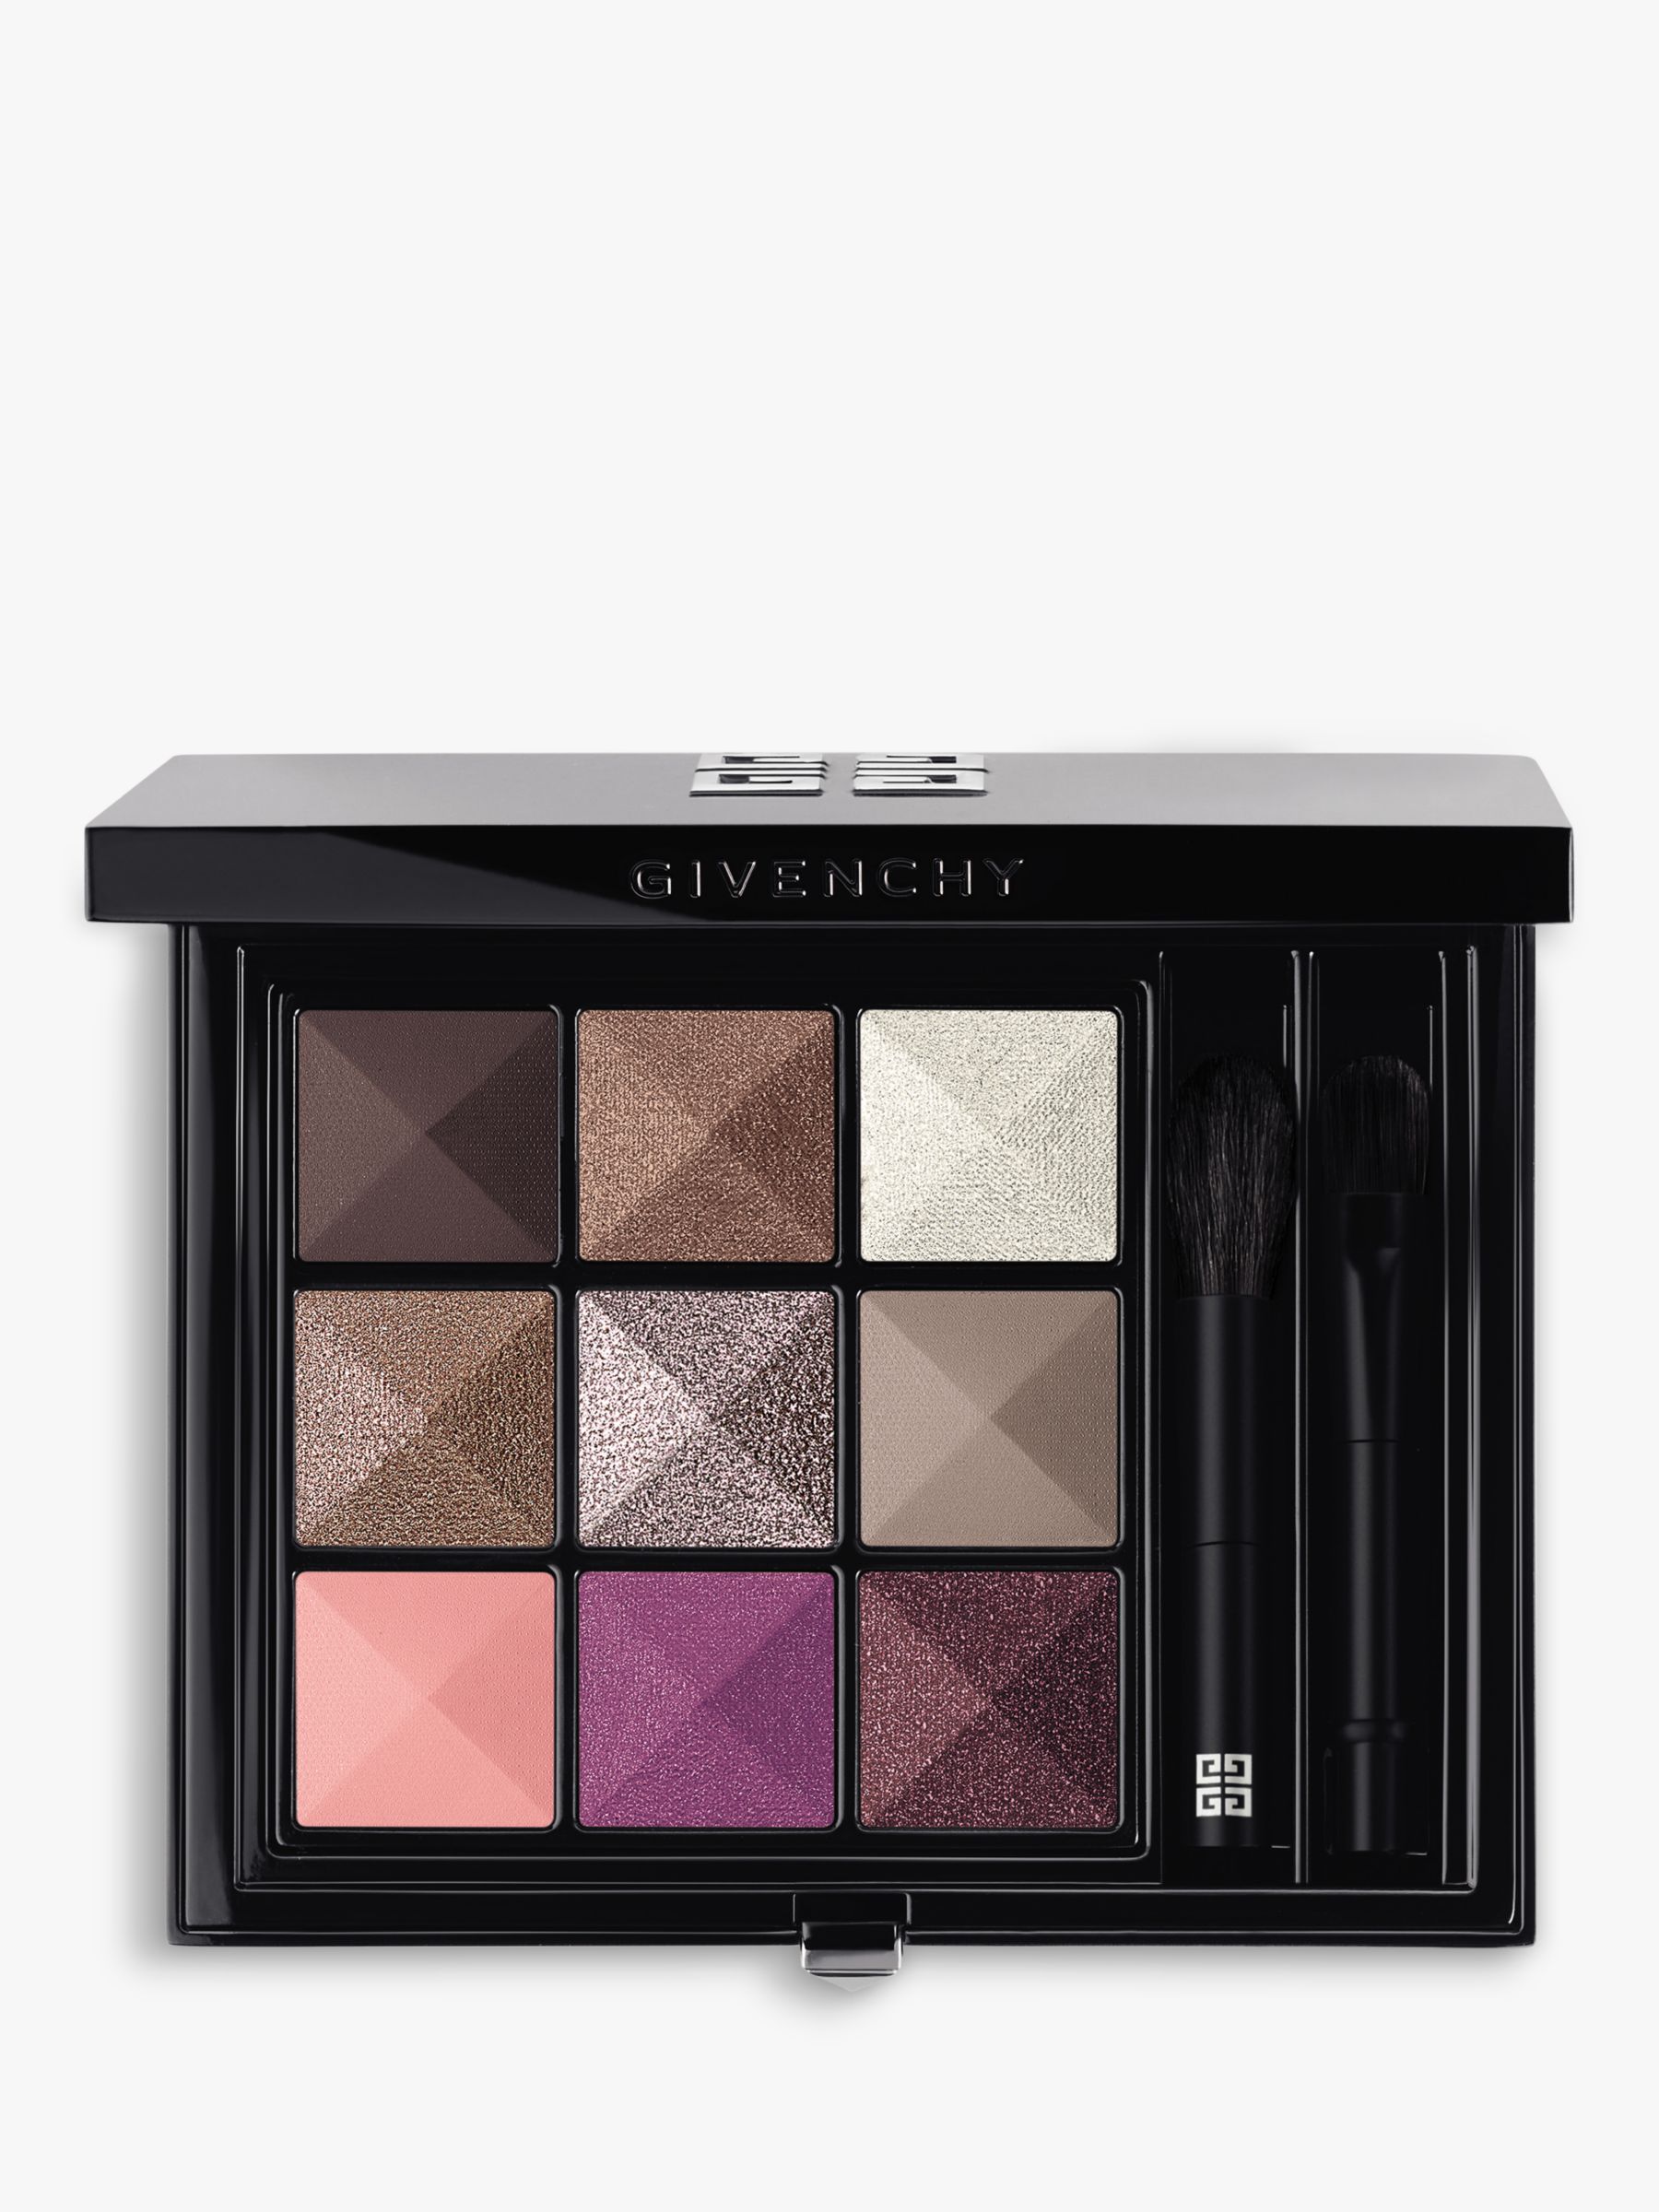 Givenchy Le 9 de Givenchy Multi-Finish Eyeshadow Palette, 9.03 1